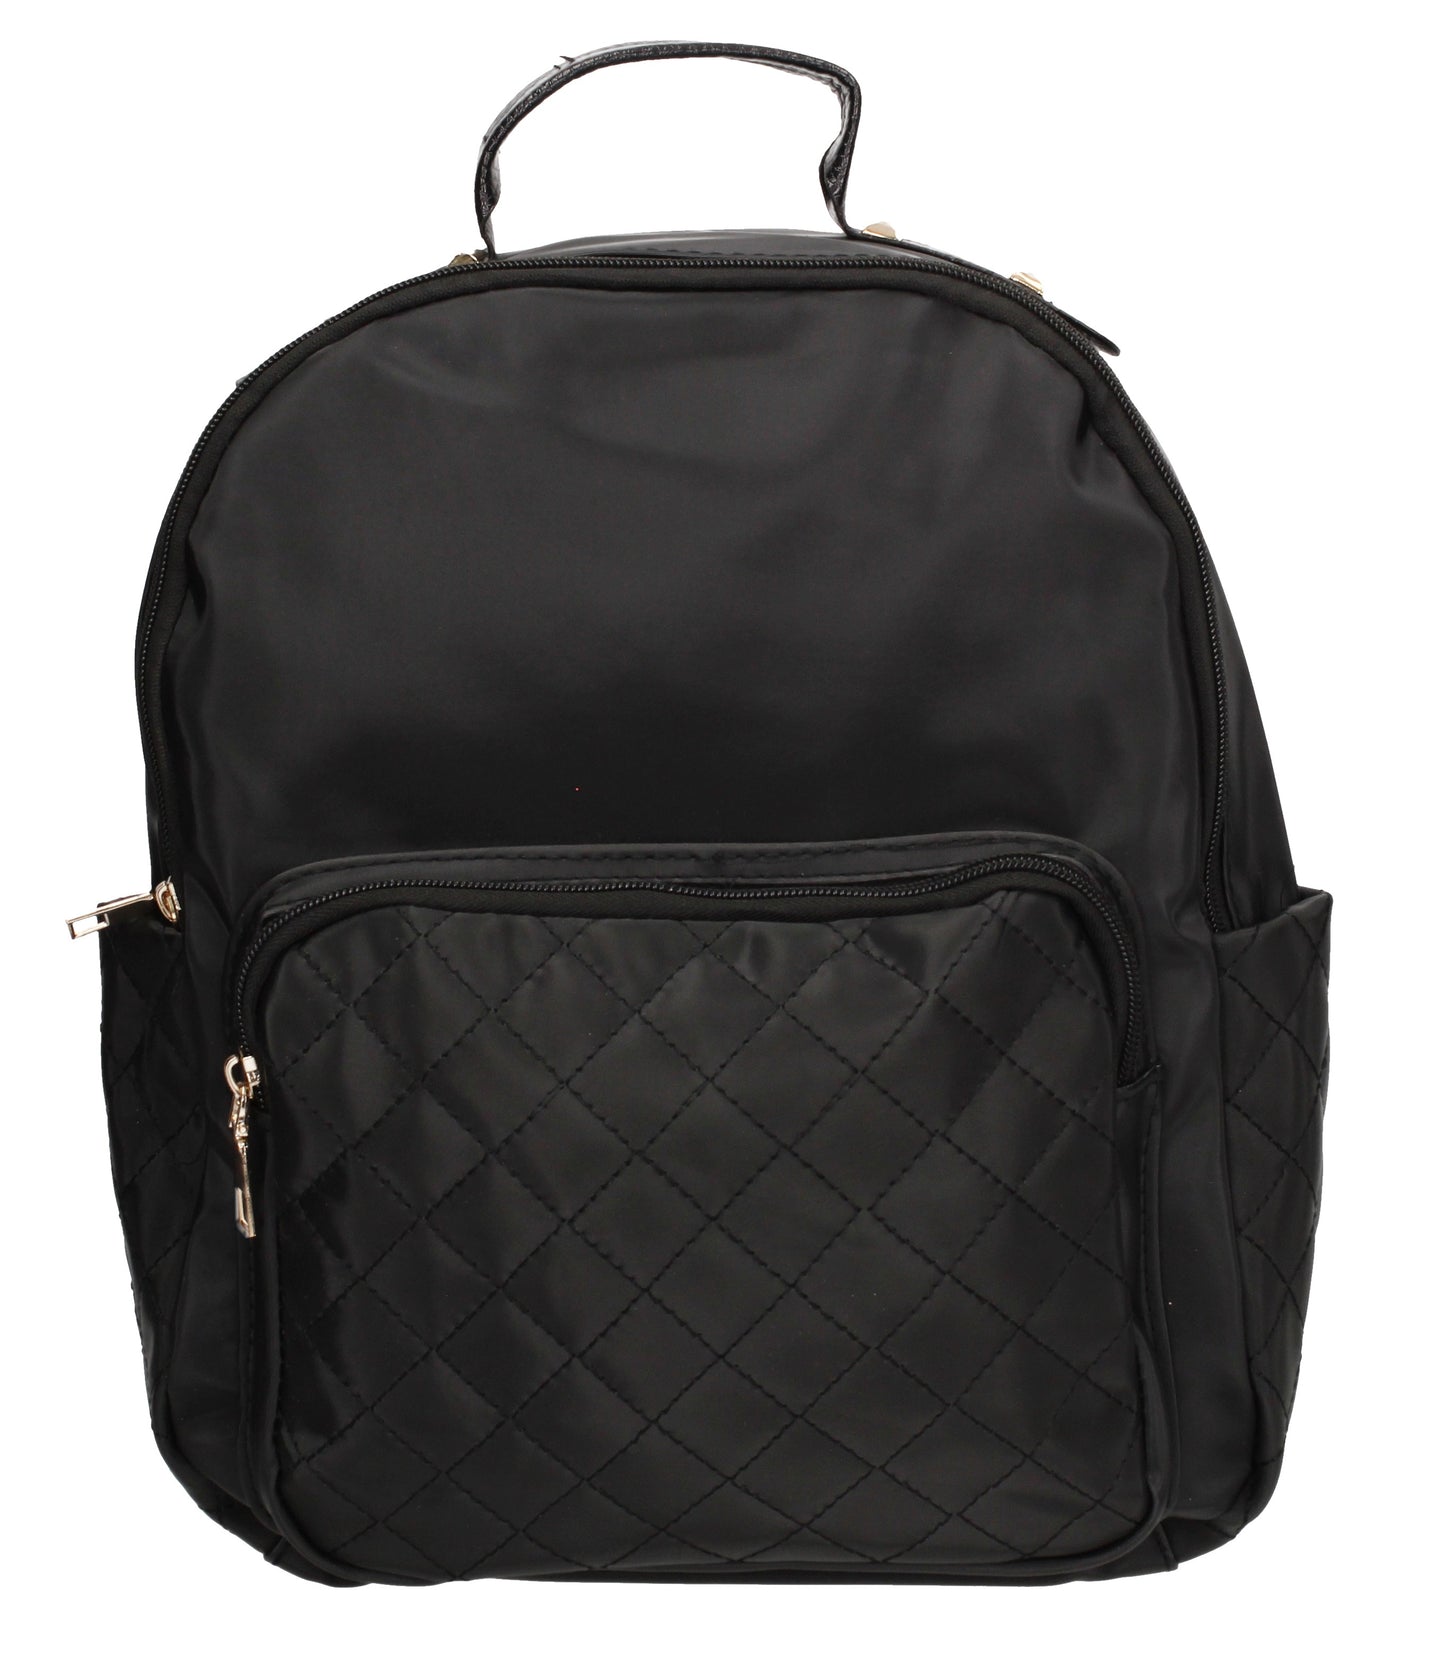 Swanky Swans Jenson Backpack Black Perfect Backpack for school!